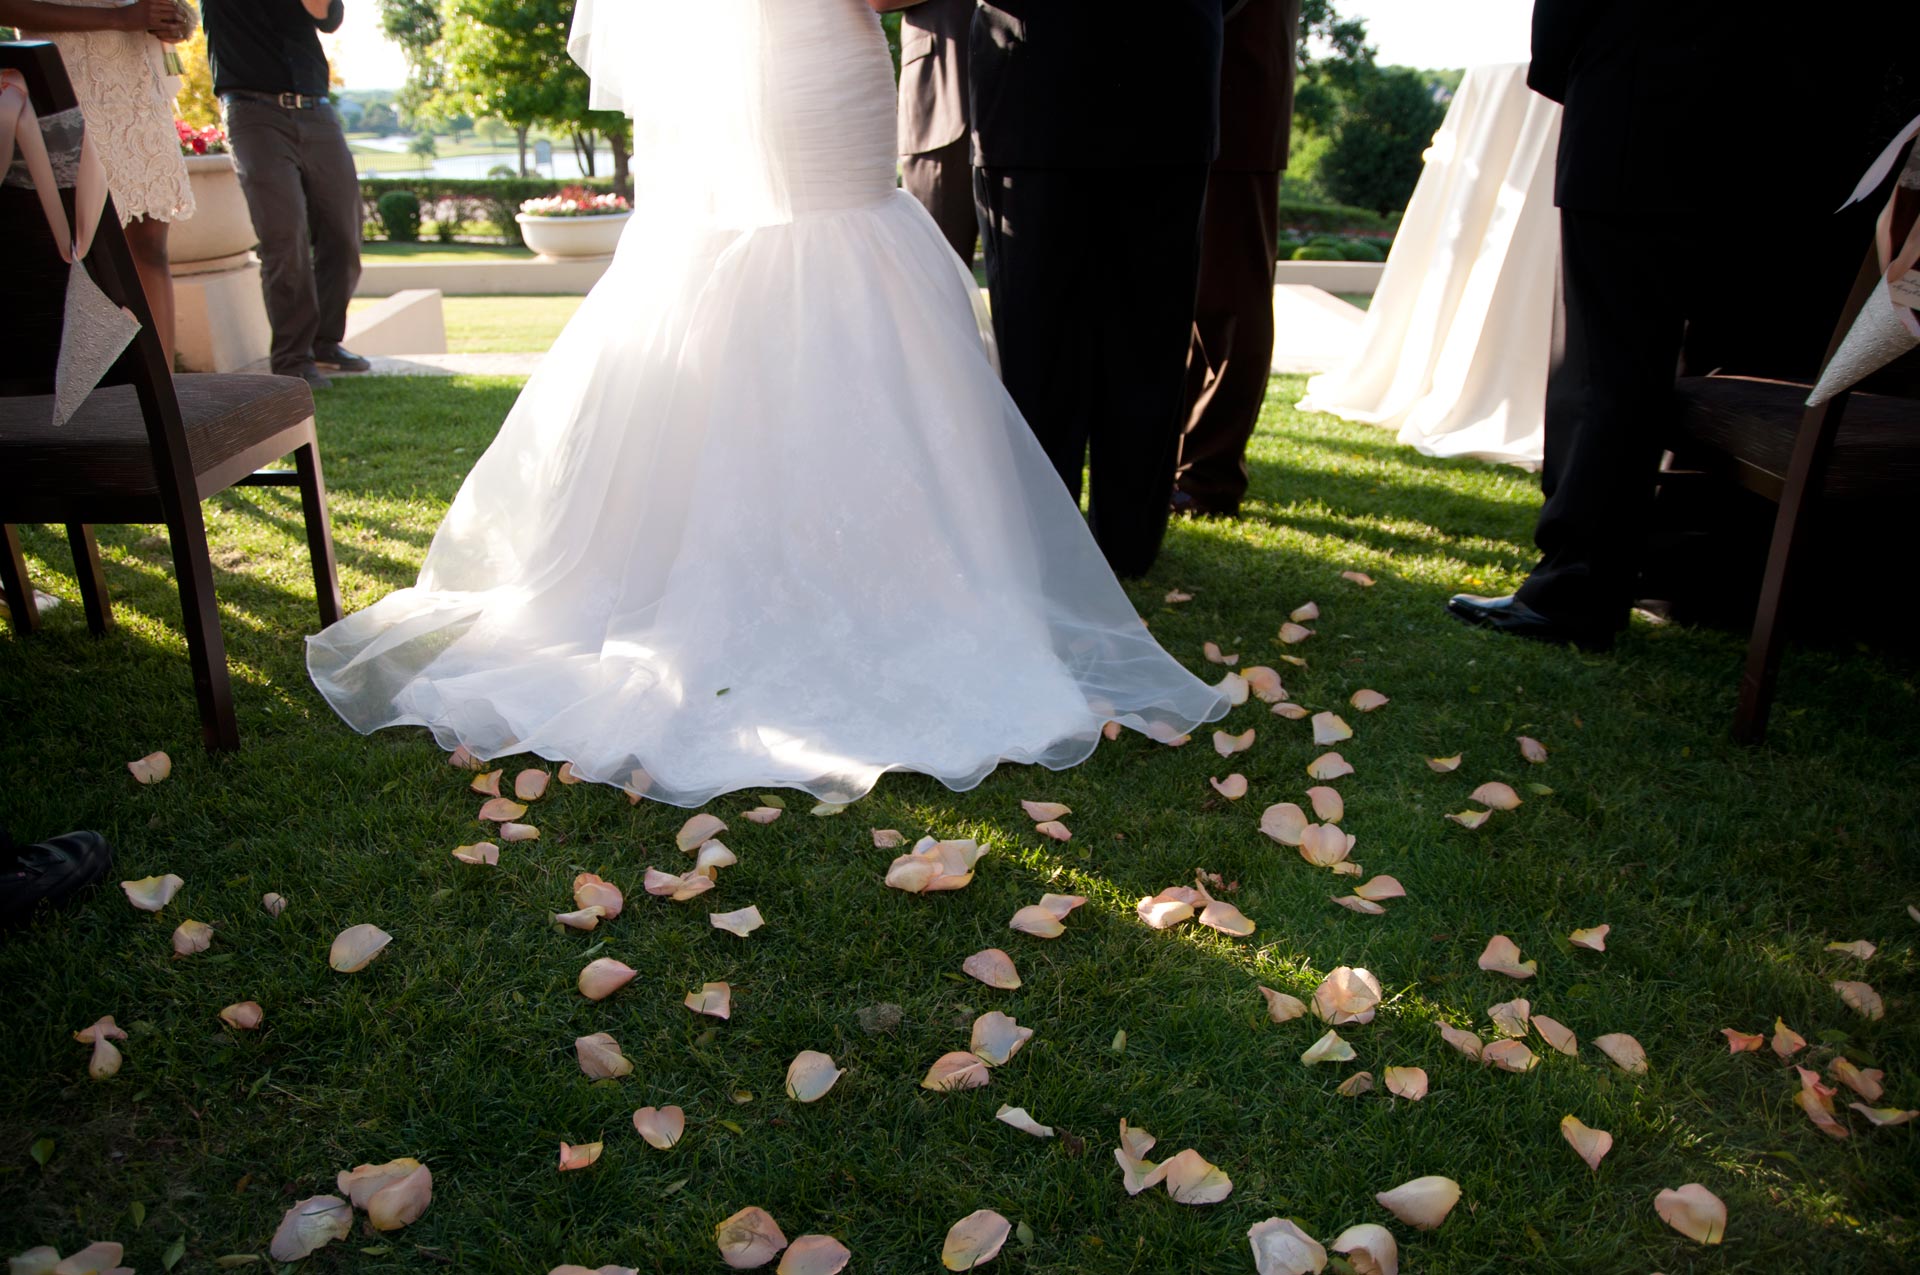 Brook's dress with rose petals on the ground behind her